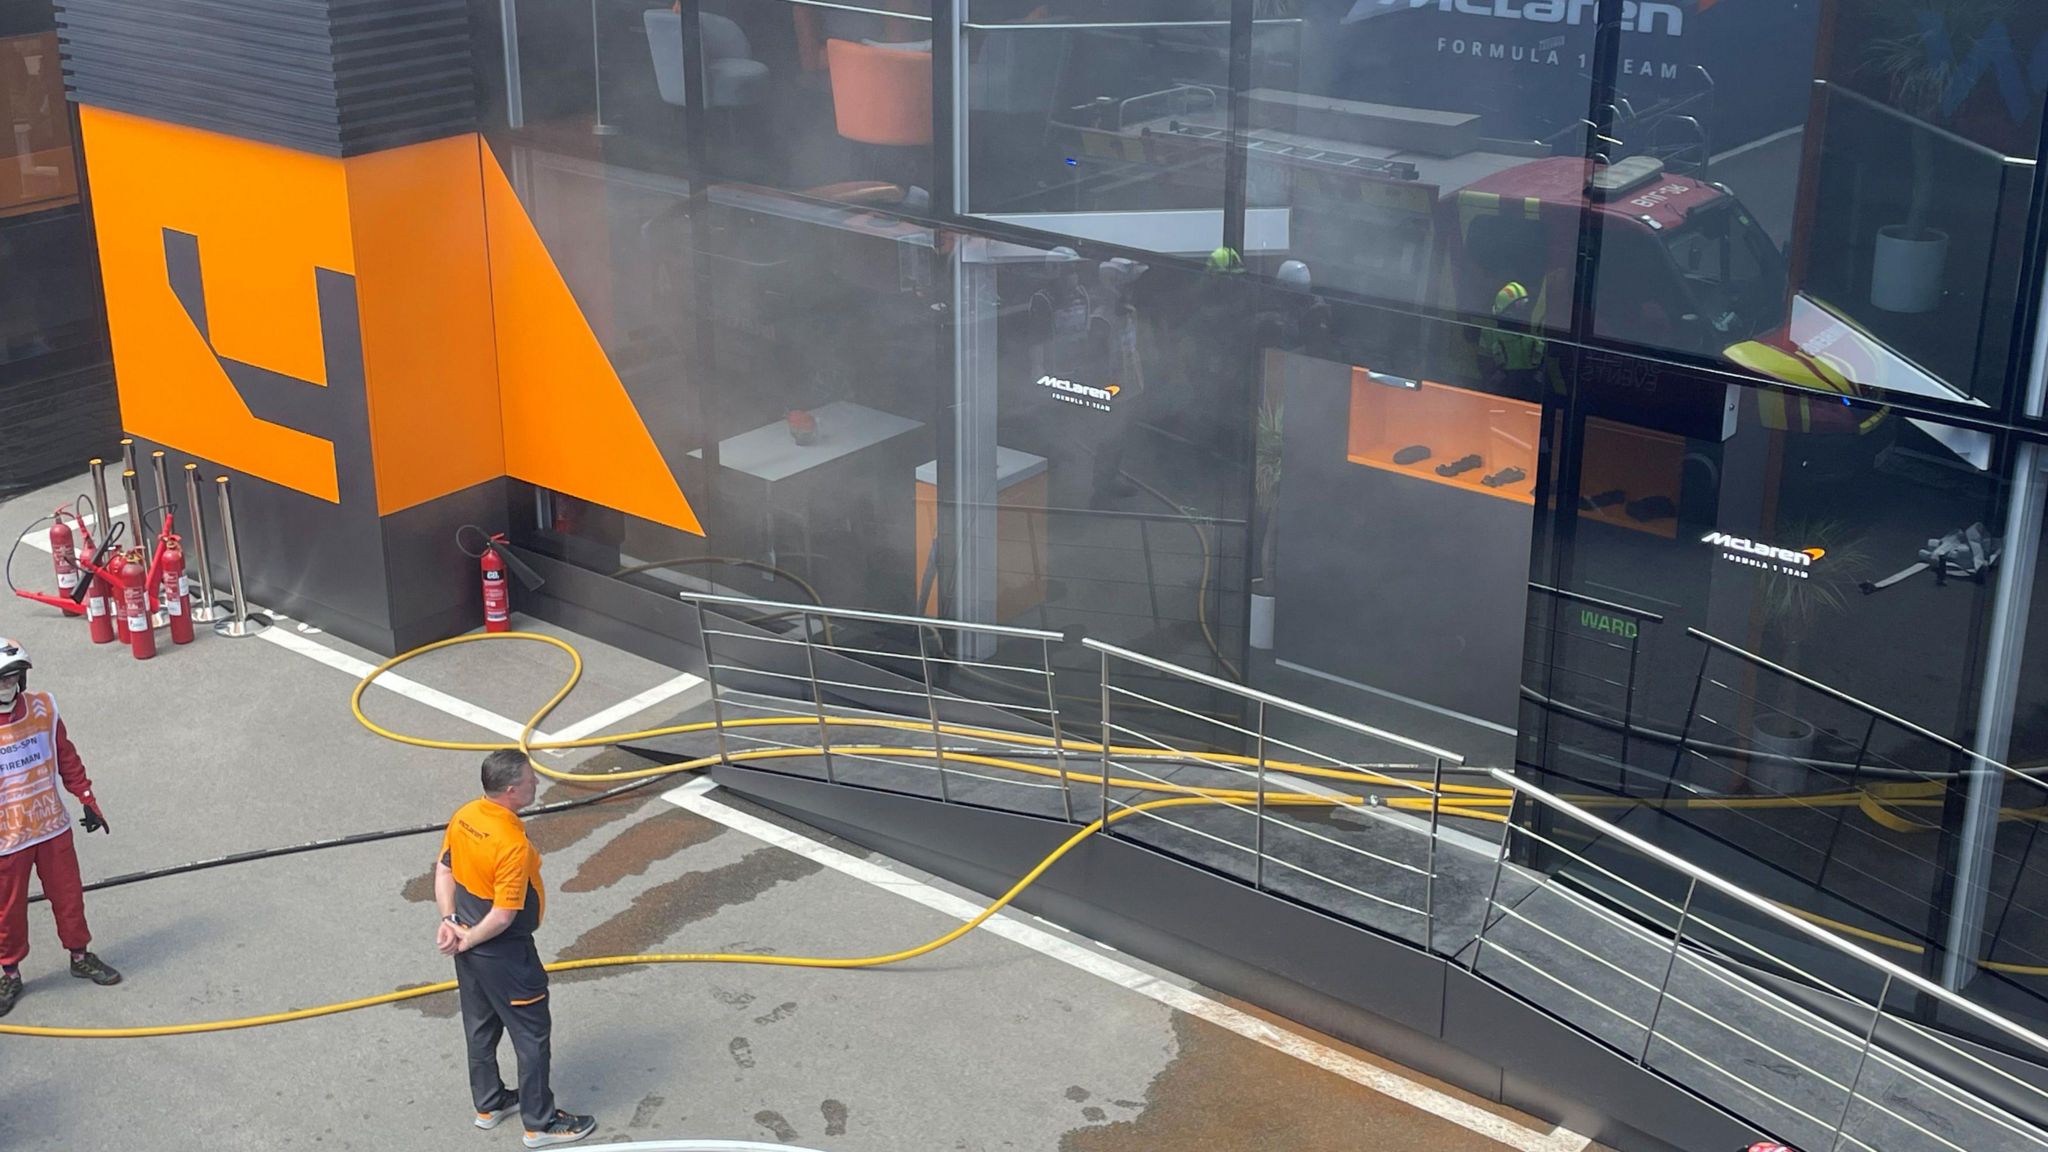 McLaren team boss Zak Brown stood outside the team's hospitality area as firefighters deal with the fire incident before final practice